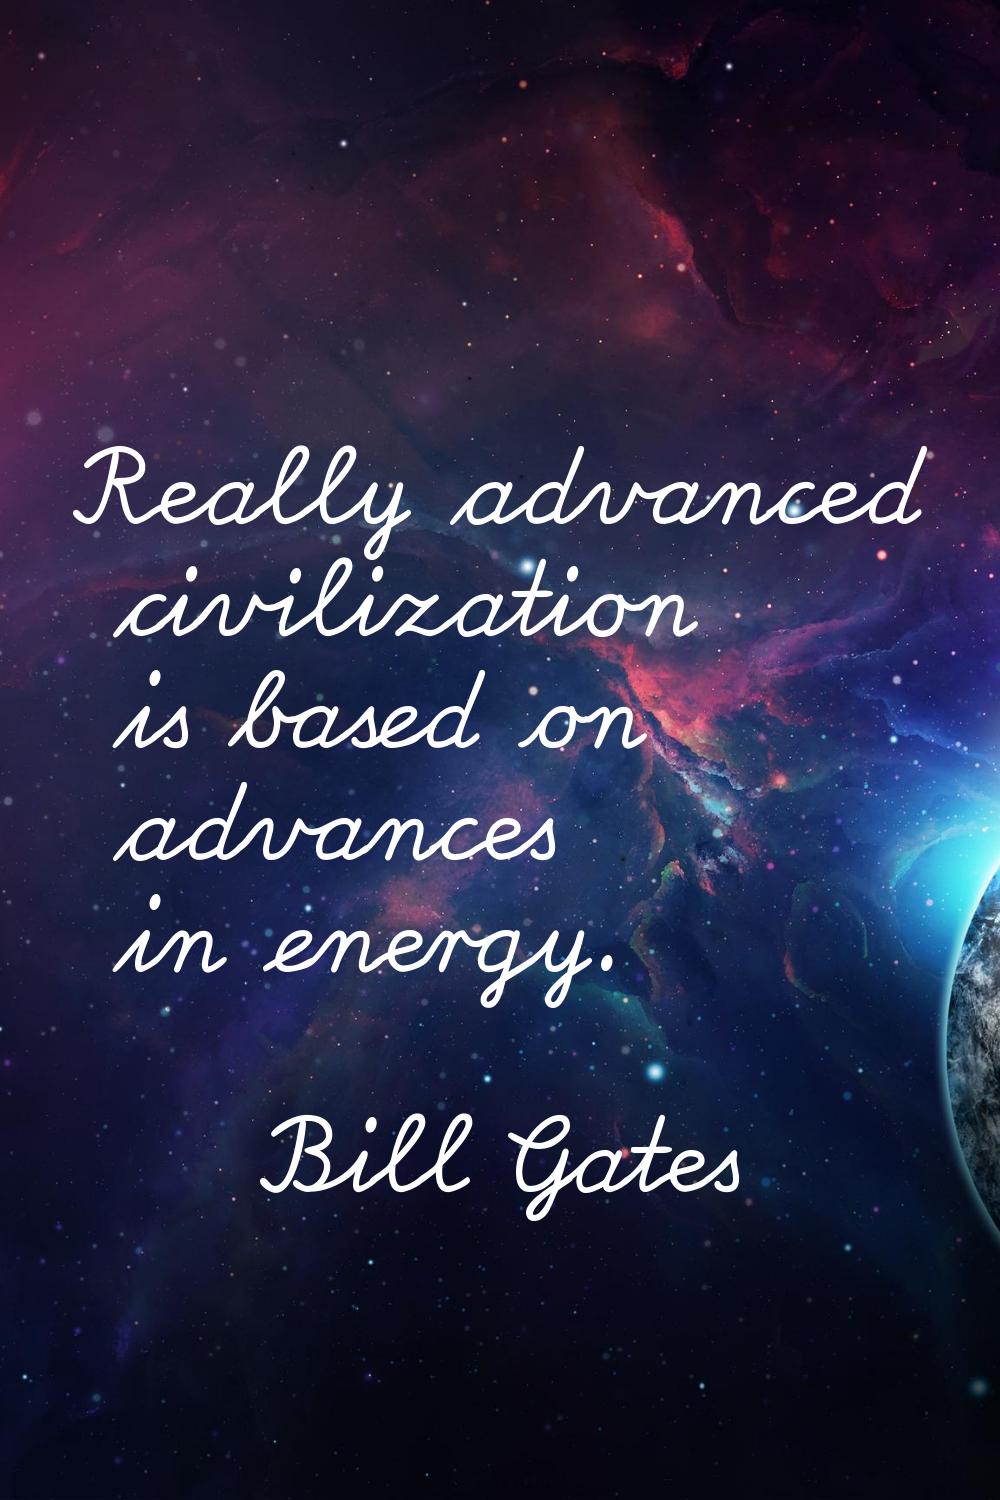 Really advanced civilization is based on advances in energy.